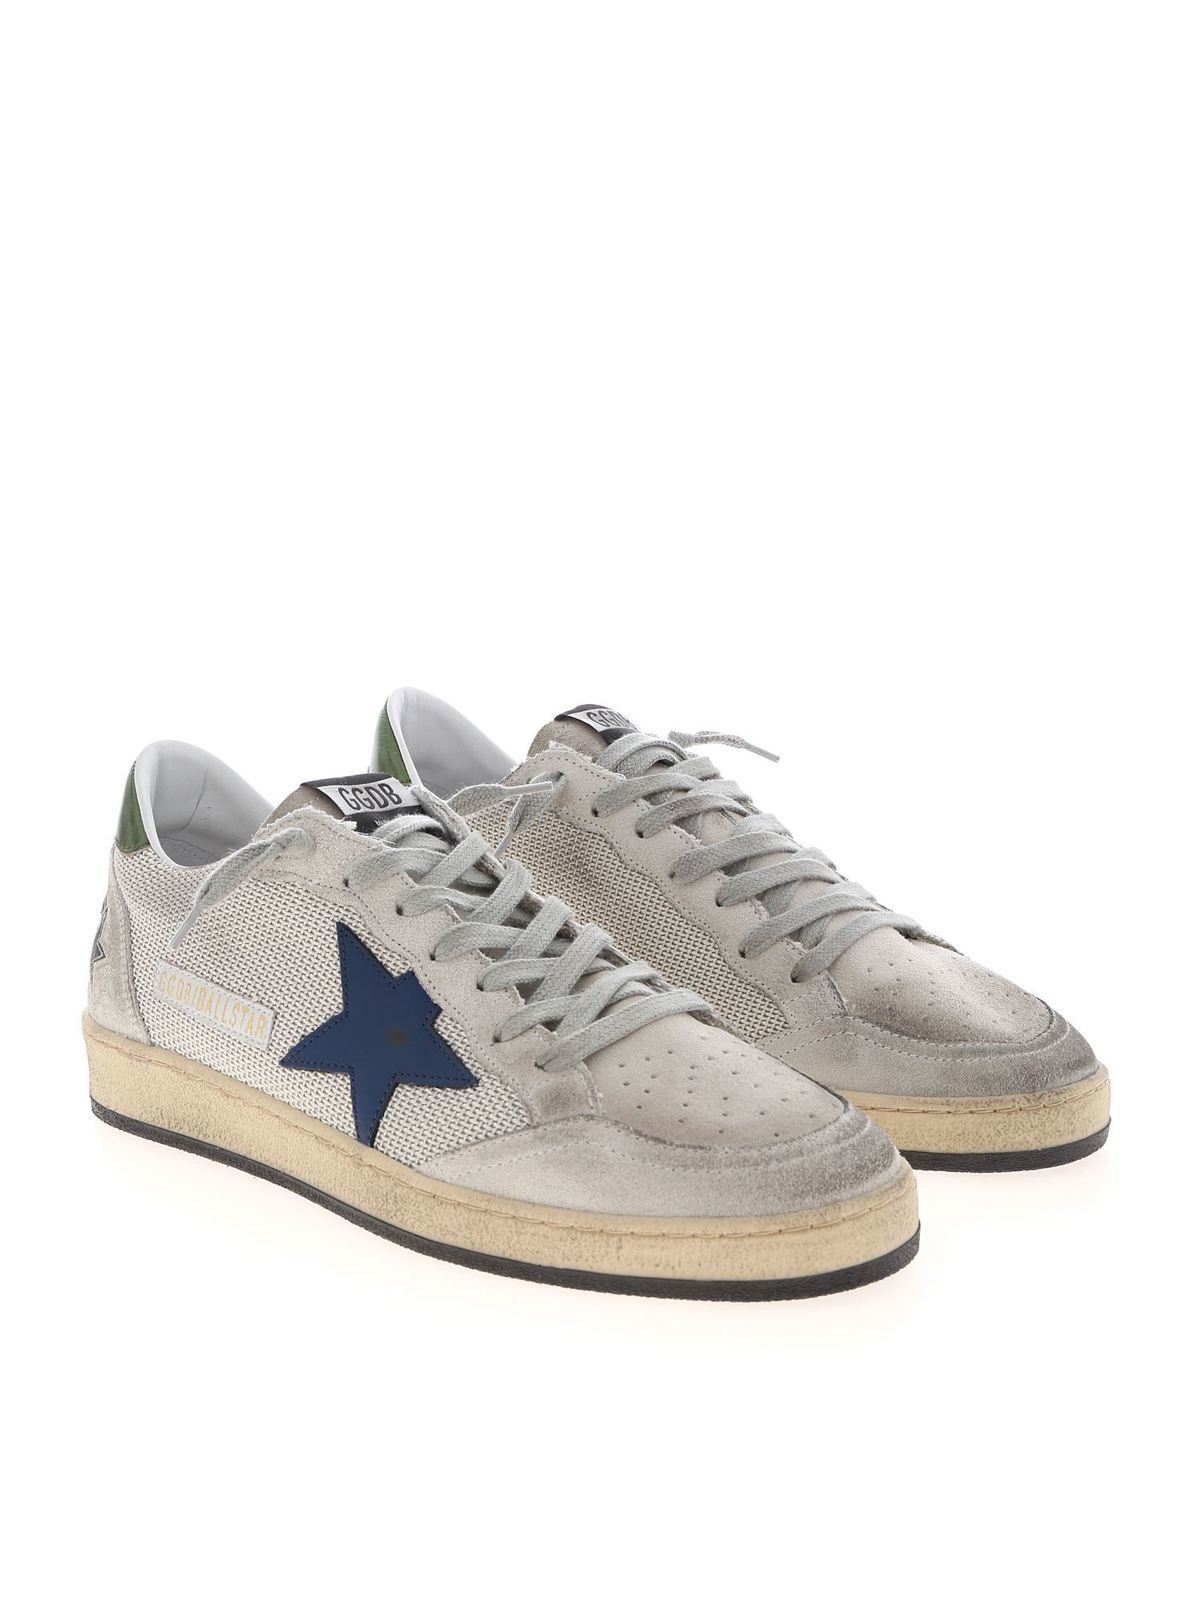 Sentimental mave Alabama Trainers Golden Goose - Ball Star sneakers in white - G36MS592A55